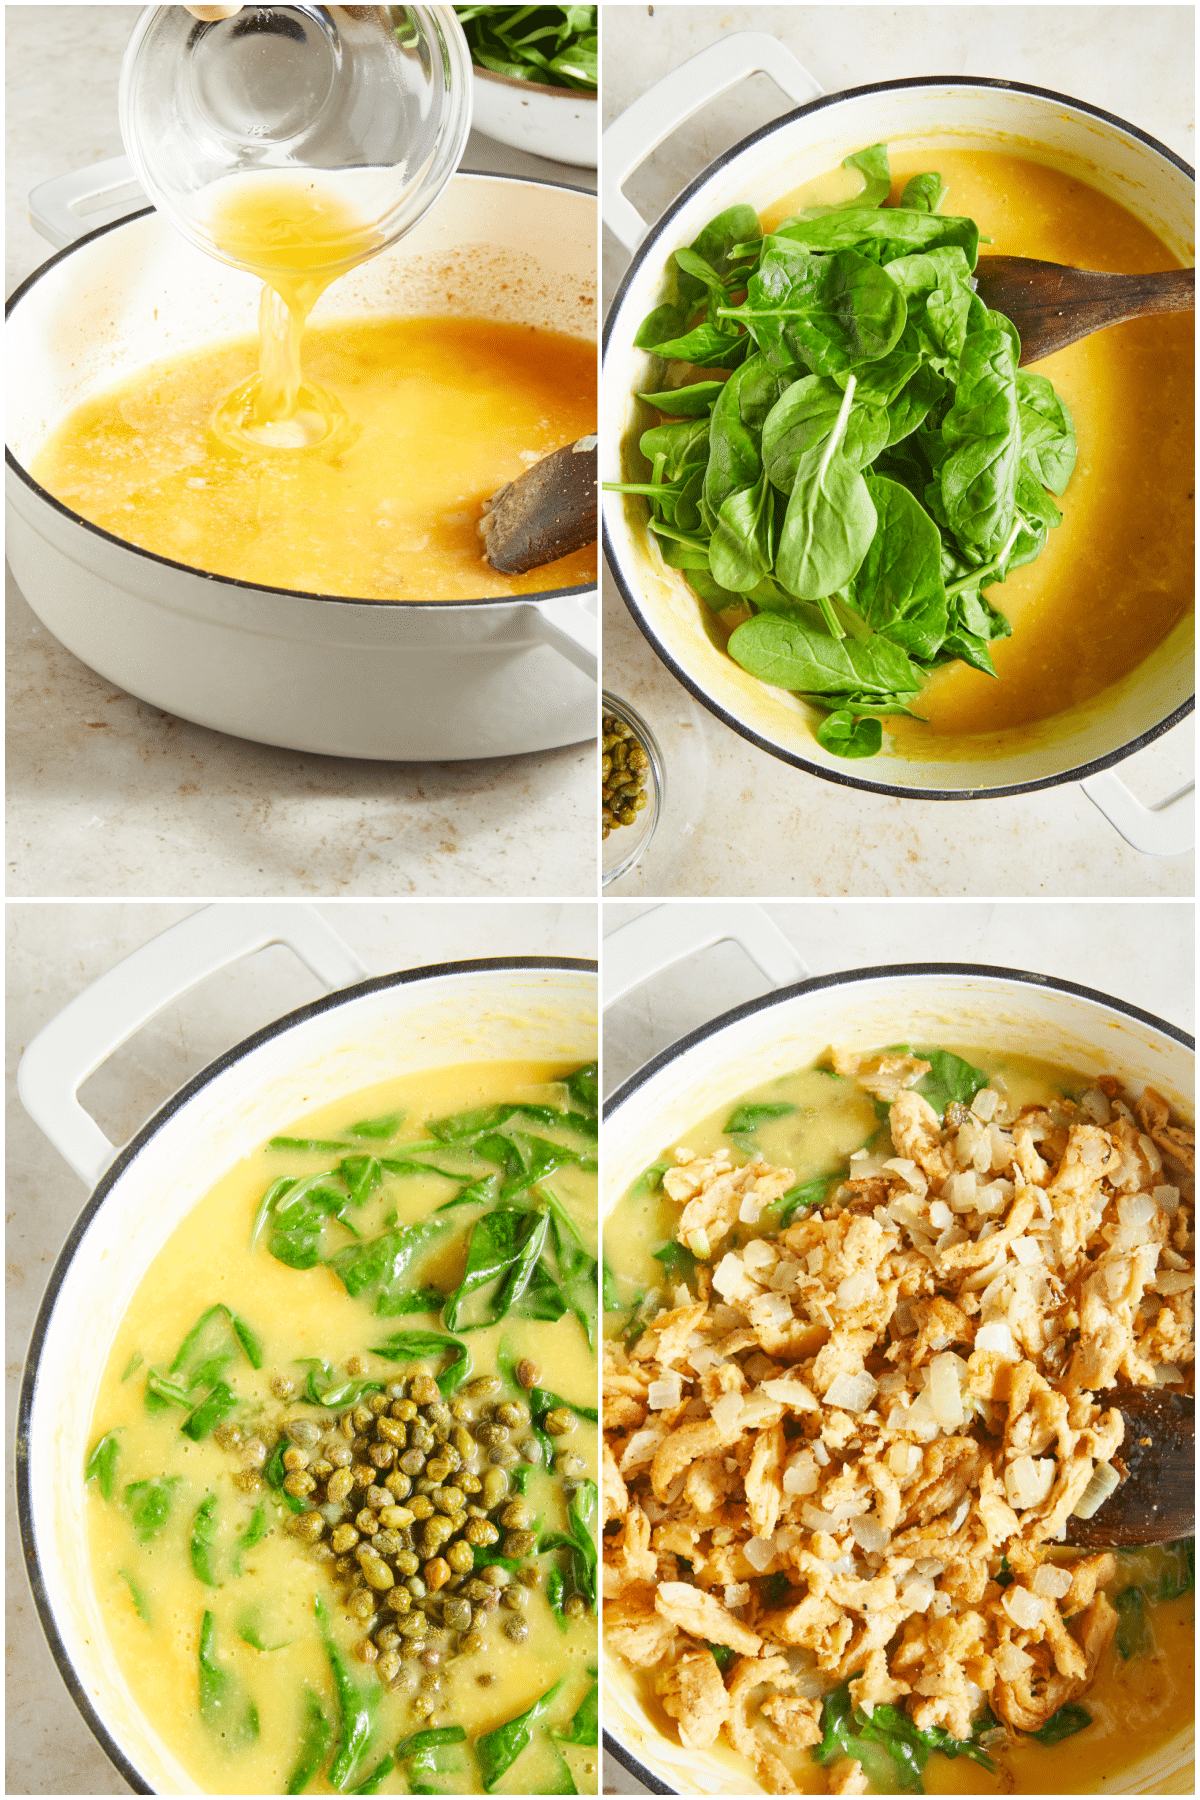 A four image collage showing how to make vegan chicken piccata, part 3: add broth to butter and flour, deglaze pan. add spinach, lemon juice, capers, and the already cooked soy curls mixture. Combine and serve over pasta.